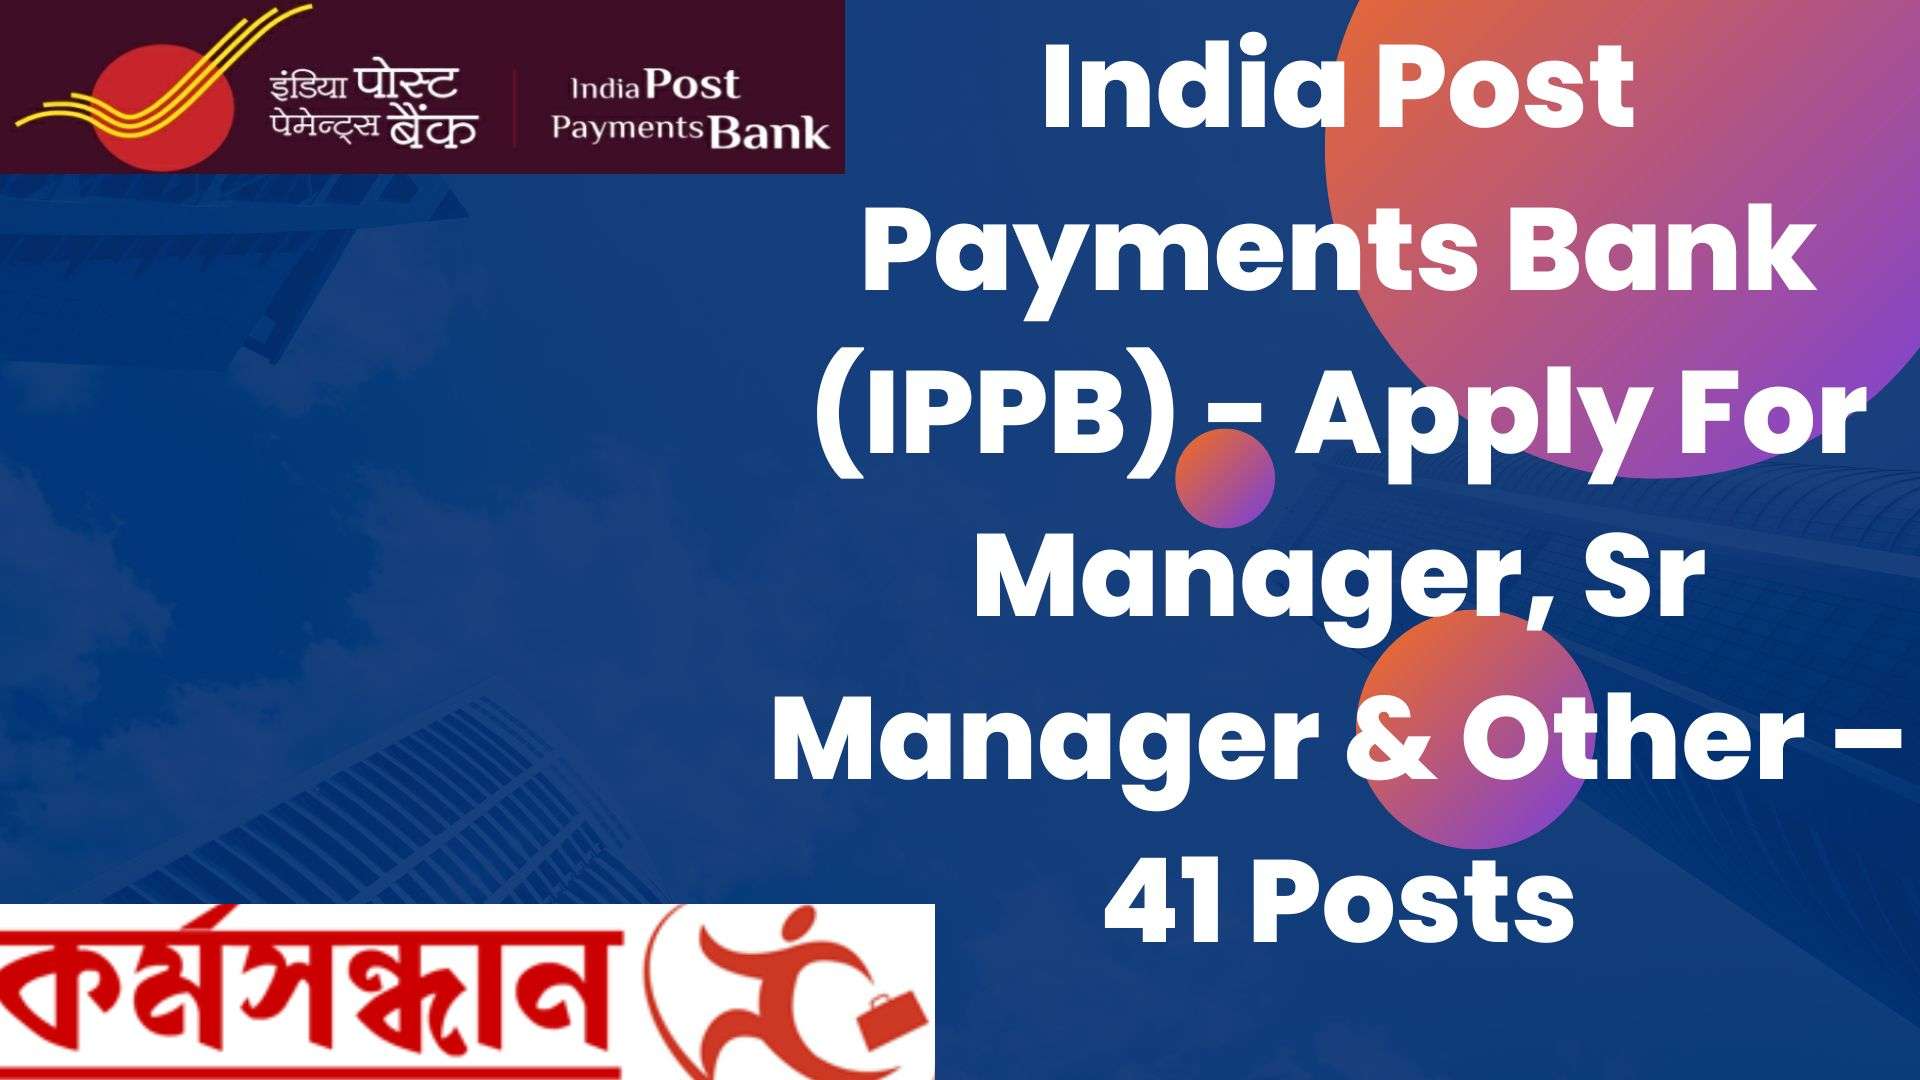 India Post Payments Bank (IPPB) - Apply For Manager, Sr Manager & Other – 41 Posts